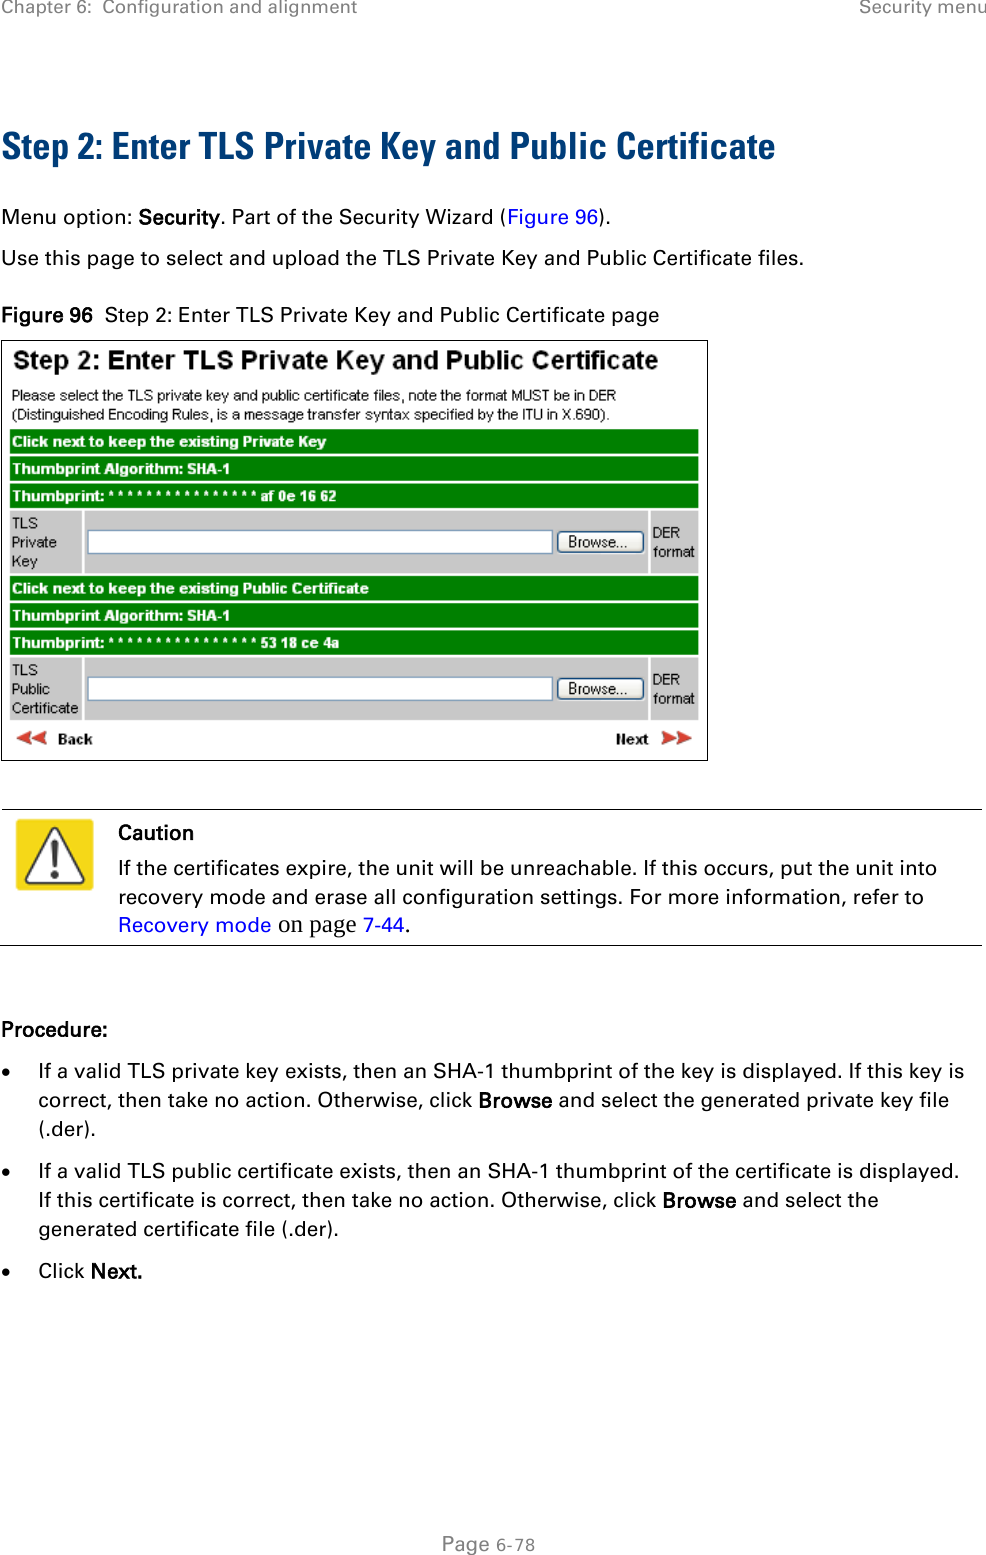 Chapter 6:  Configuration and alignment Security menu  Step 2: Enter TLS Private Key and Public Certificate Menu option: Security. Part of the Security Wizard (Figure 96). Use this page to select and upload the TLS Private Key and Public Certificate files. Figure 96  Step 2: Enter TLS Private Key and Public Certificate page    Caution If the certificates expire, the unit will be unreachable. If this occurs, put the unit into recovery mode and erase all configuration settings. For more information, refer to Recovery mode on page 7-44.  Procedure: • If a valid TLS private key exists, then an SHA-1 thumbprint of the key is displayed. If this key is correct, then take no action. Otherwise, click Browse and select the generated private key file (.der). • If a valid TLS public certificate exists, then an SHA-1 thumbprint of the certificate is displayed. If this certificate is correct, then take no action. Otherwise, click Browse and select the generated certificate file (.der). • Click Next.  Page 6-78 